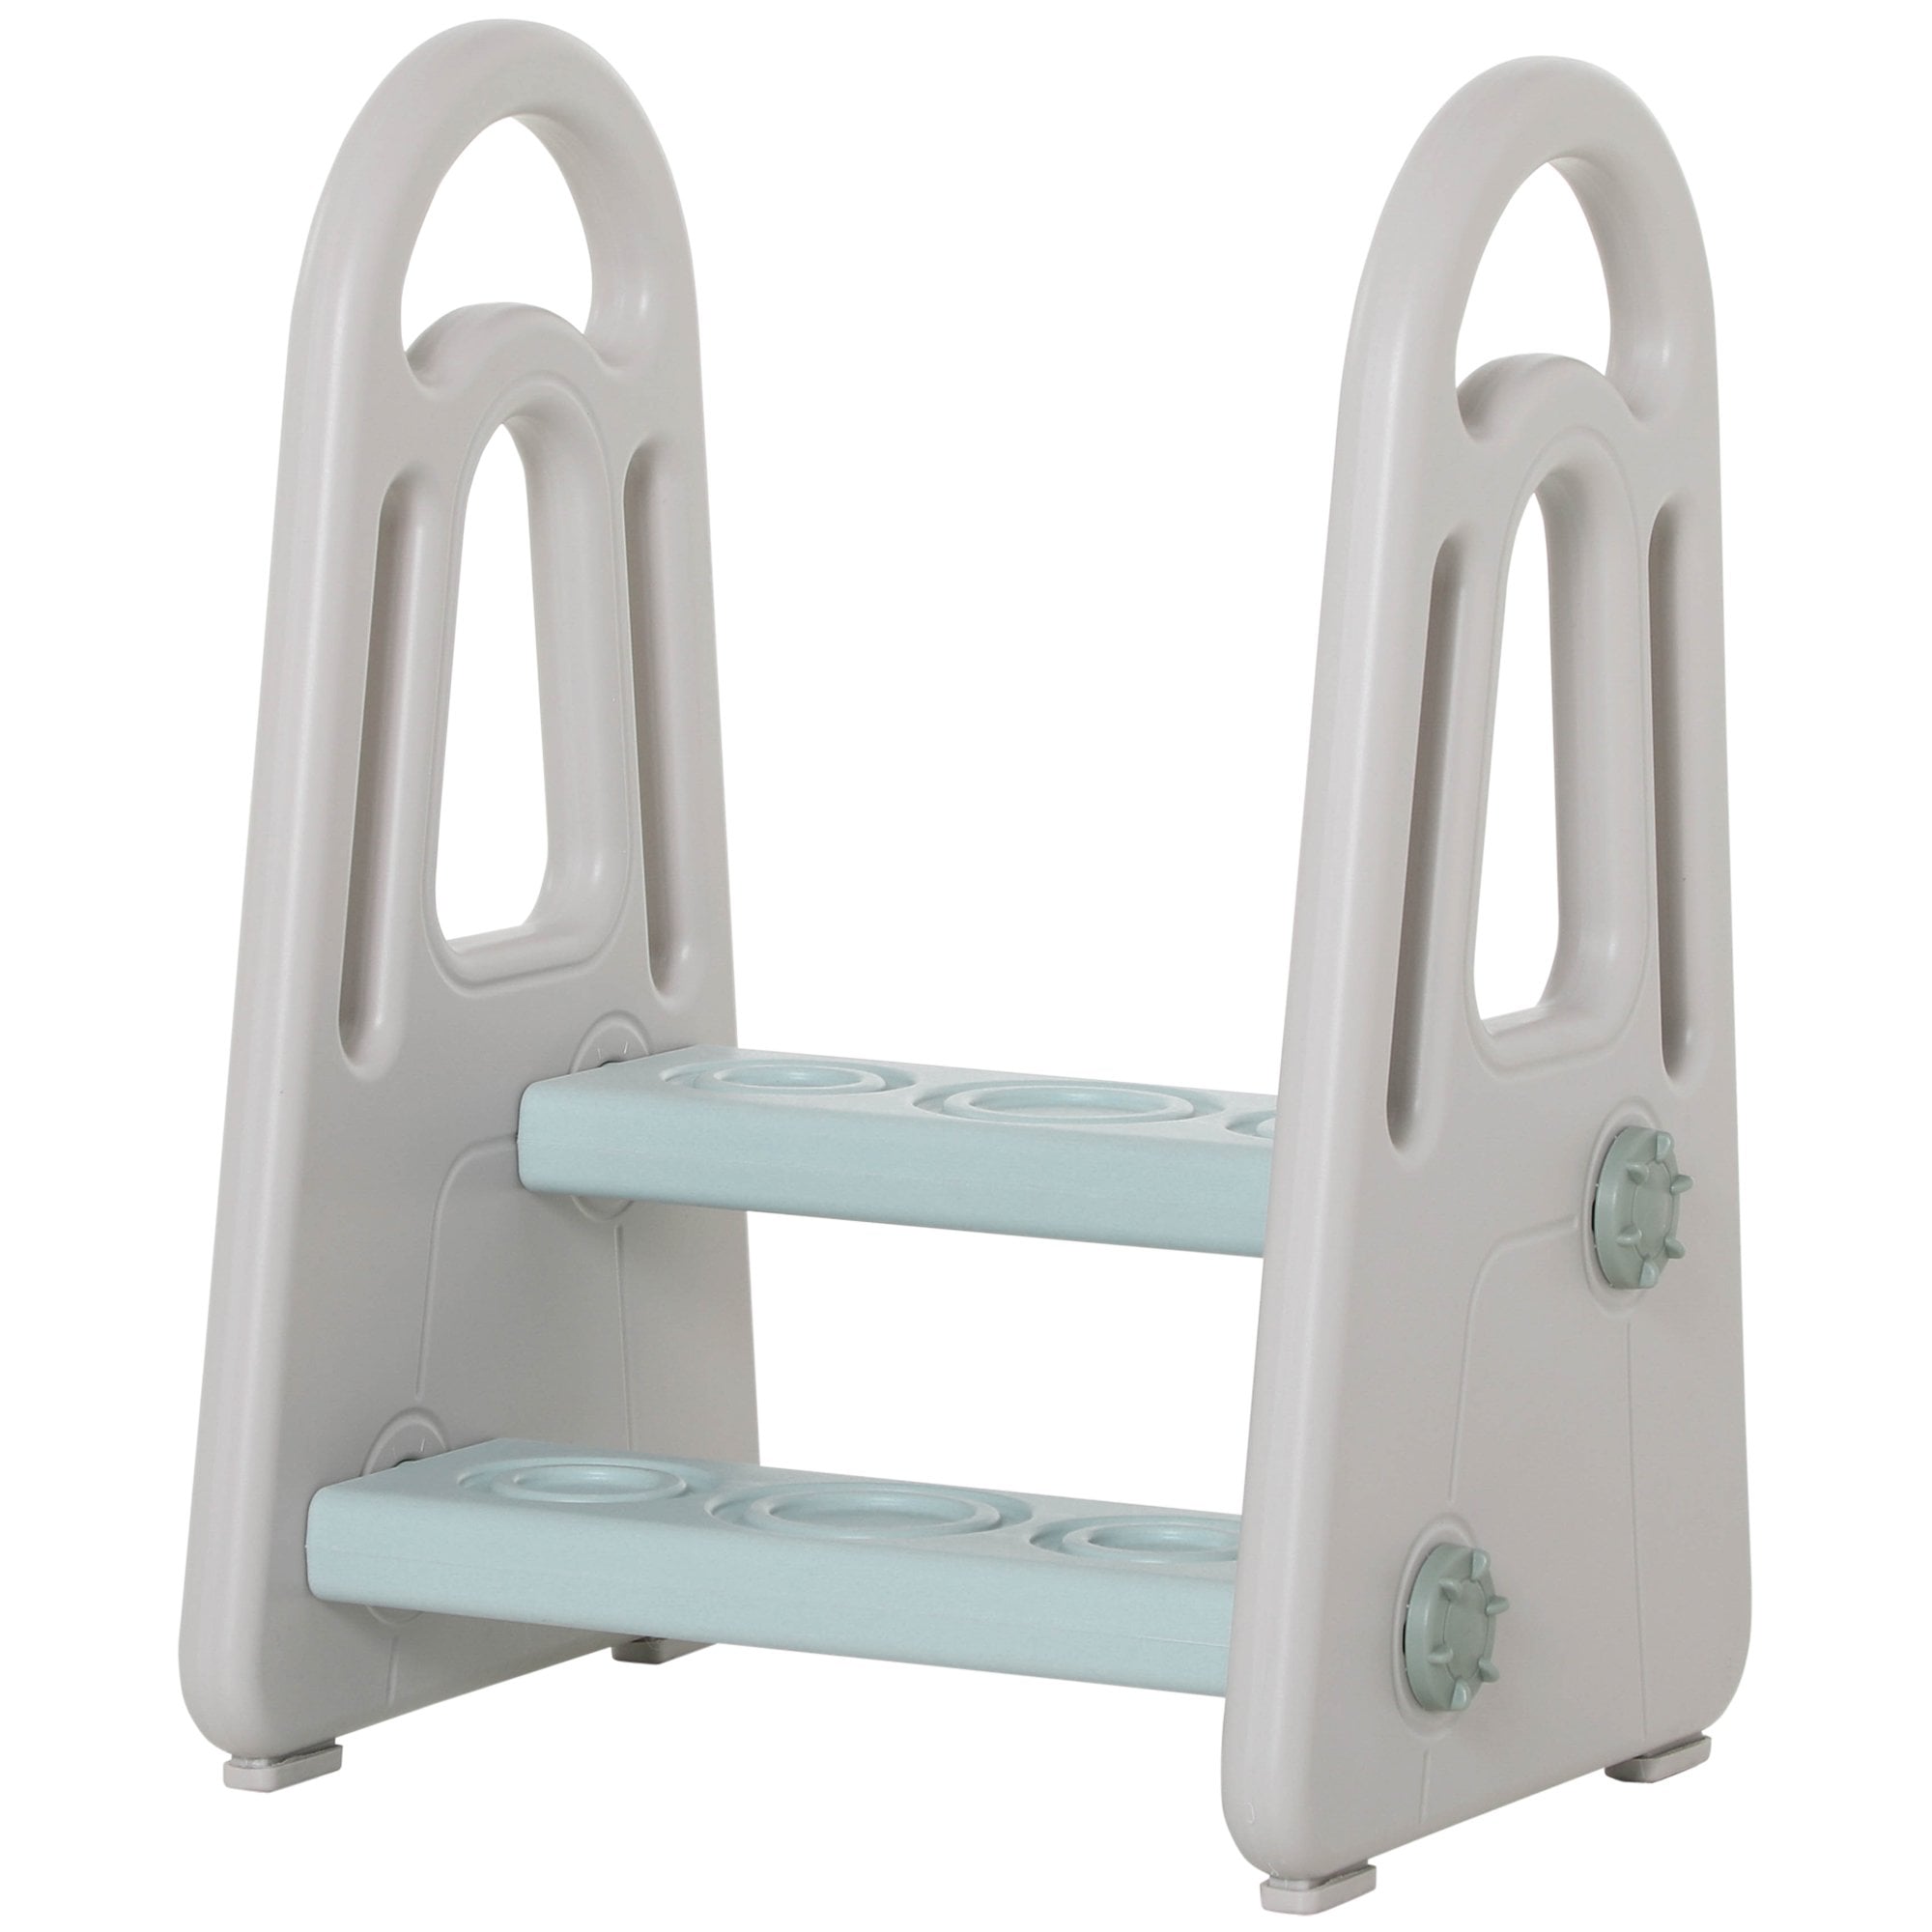 Two Step Stool for Kids Toddlers Ladder or Toilet Potty Training Bathroom Sink Bedroom Kitchen Helper with Non-slip Handle and Feet Pad Blue and Grey